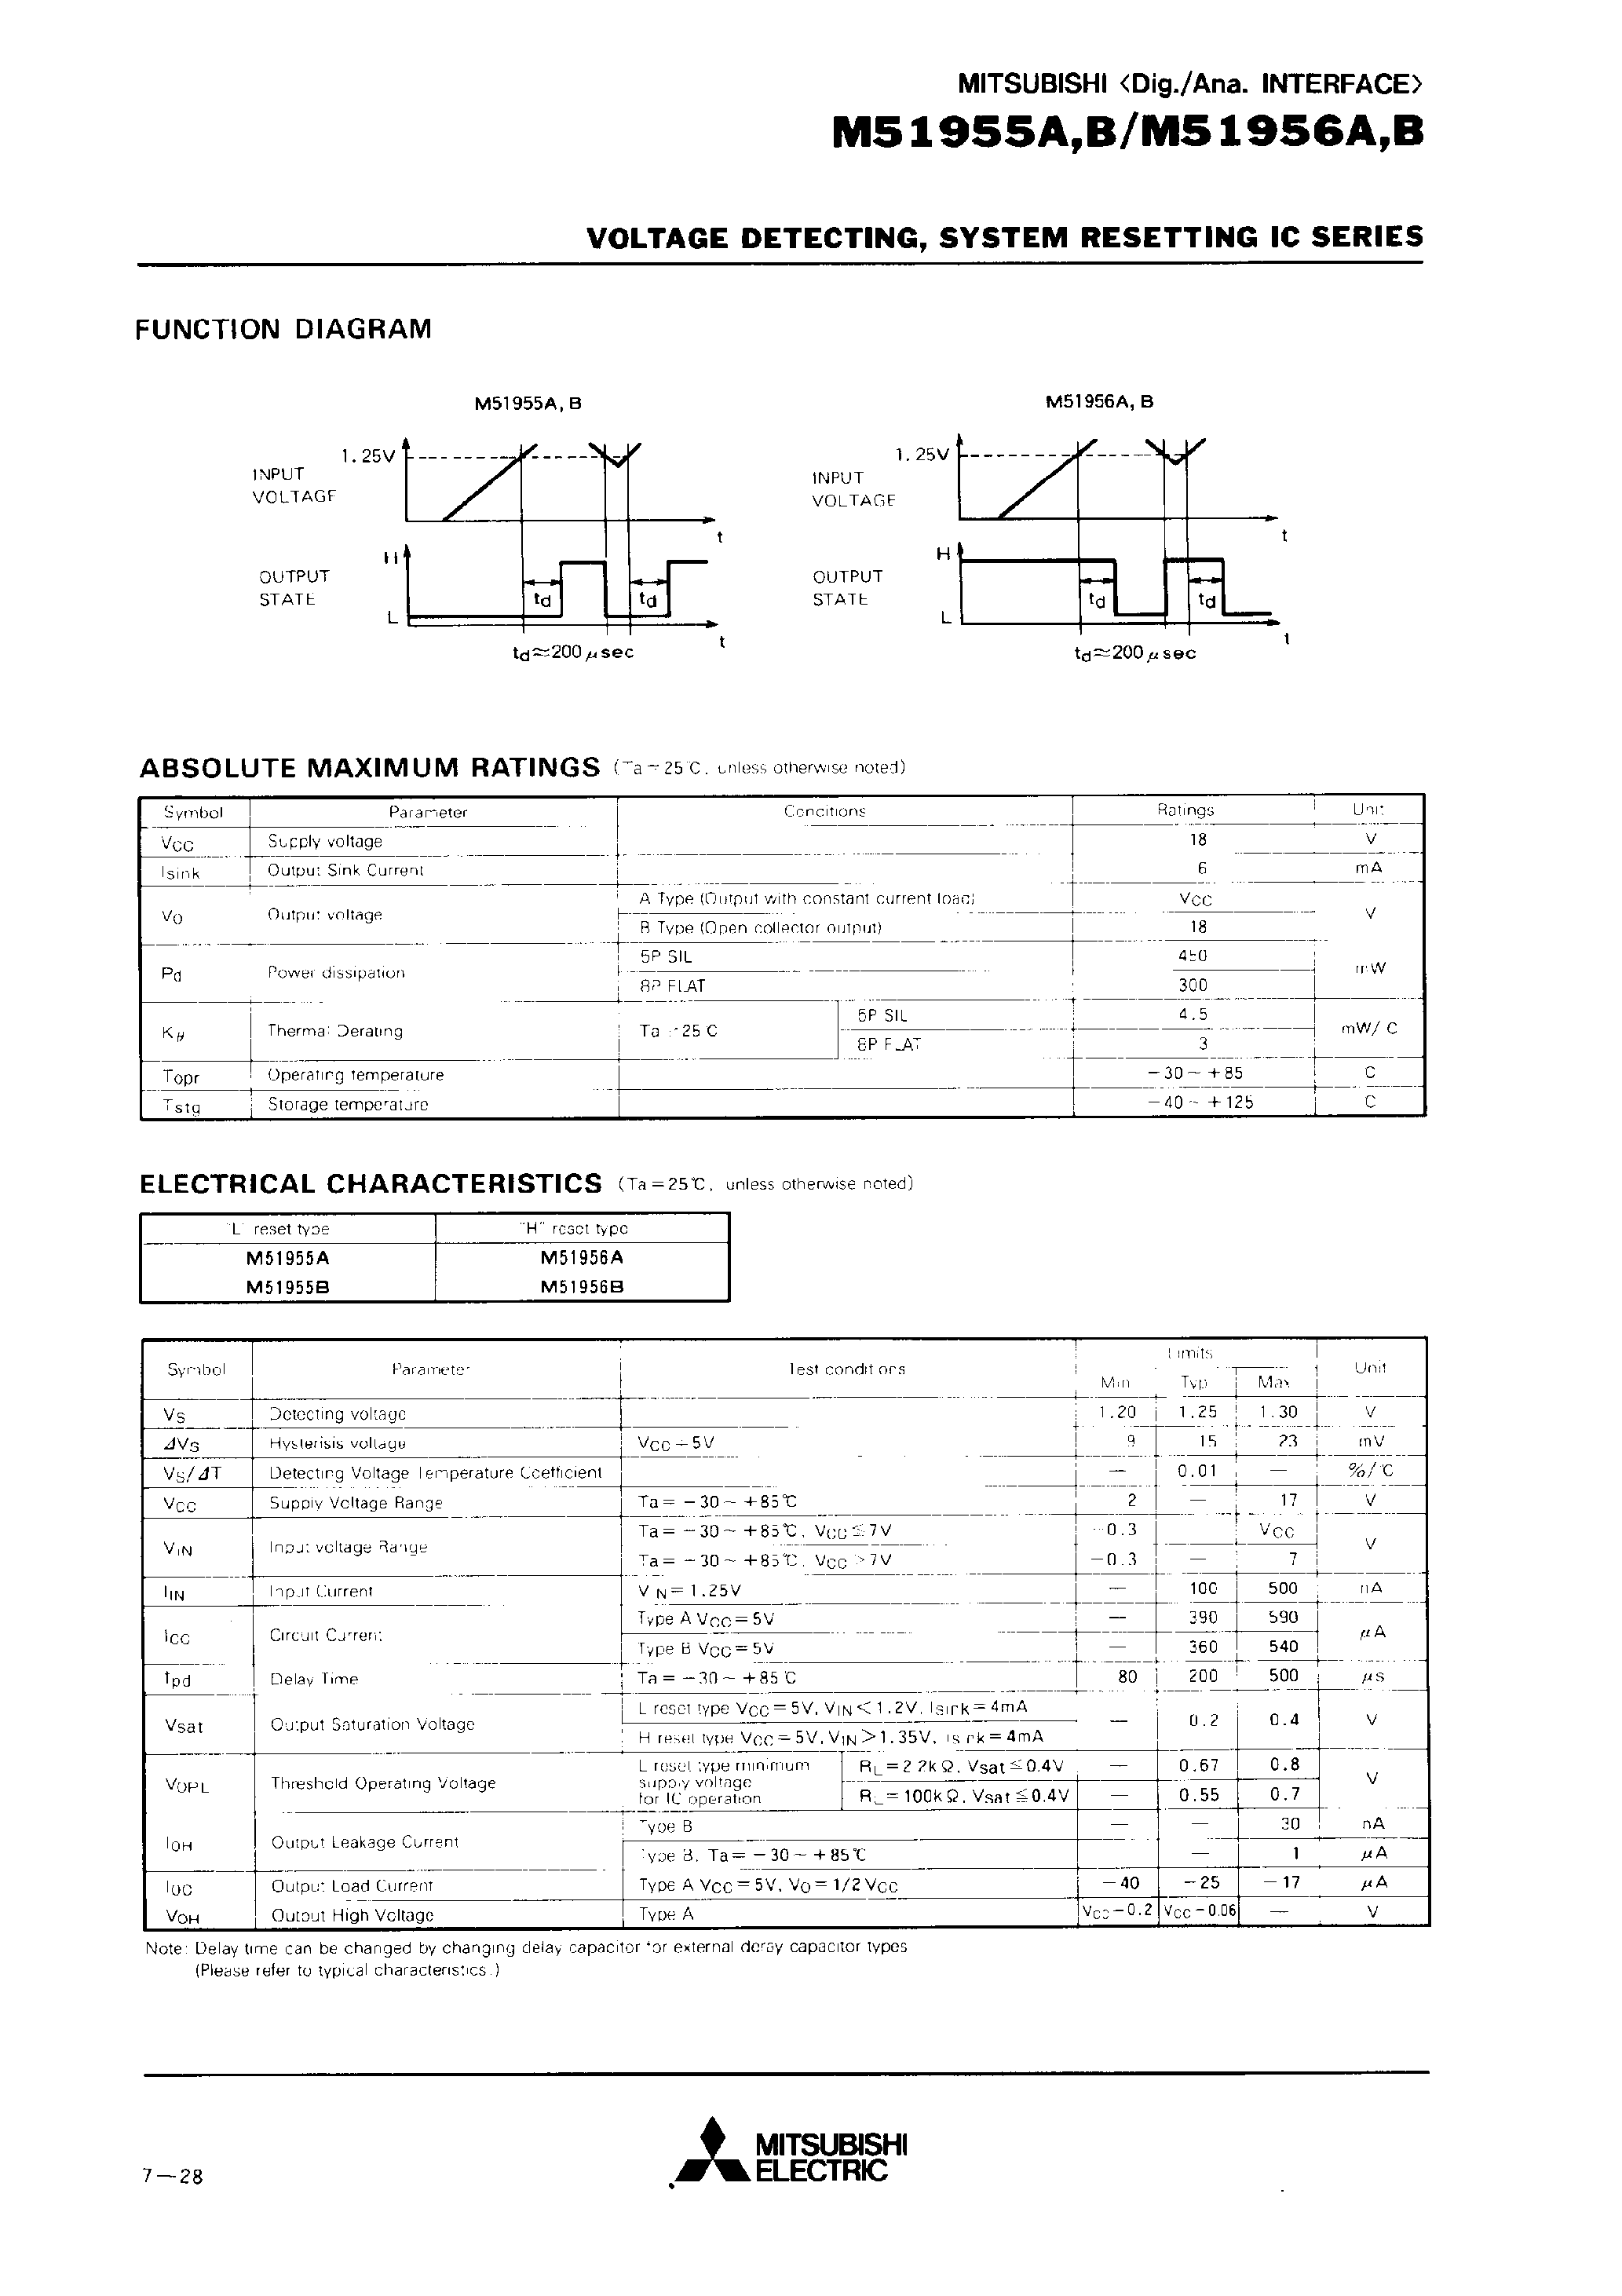 Datasheet M51956B - VOLTAGE DETECTING/ SYSTEM RESETTING IC SERIES page 2